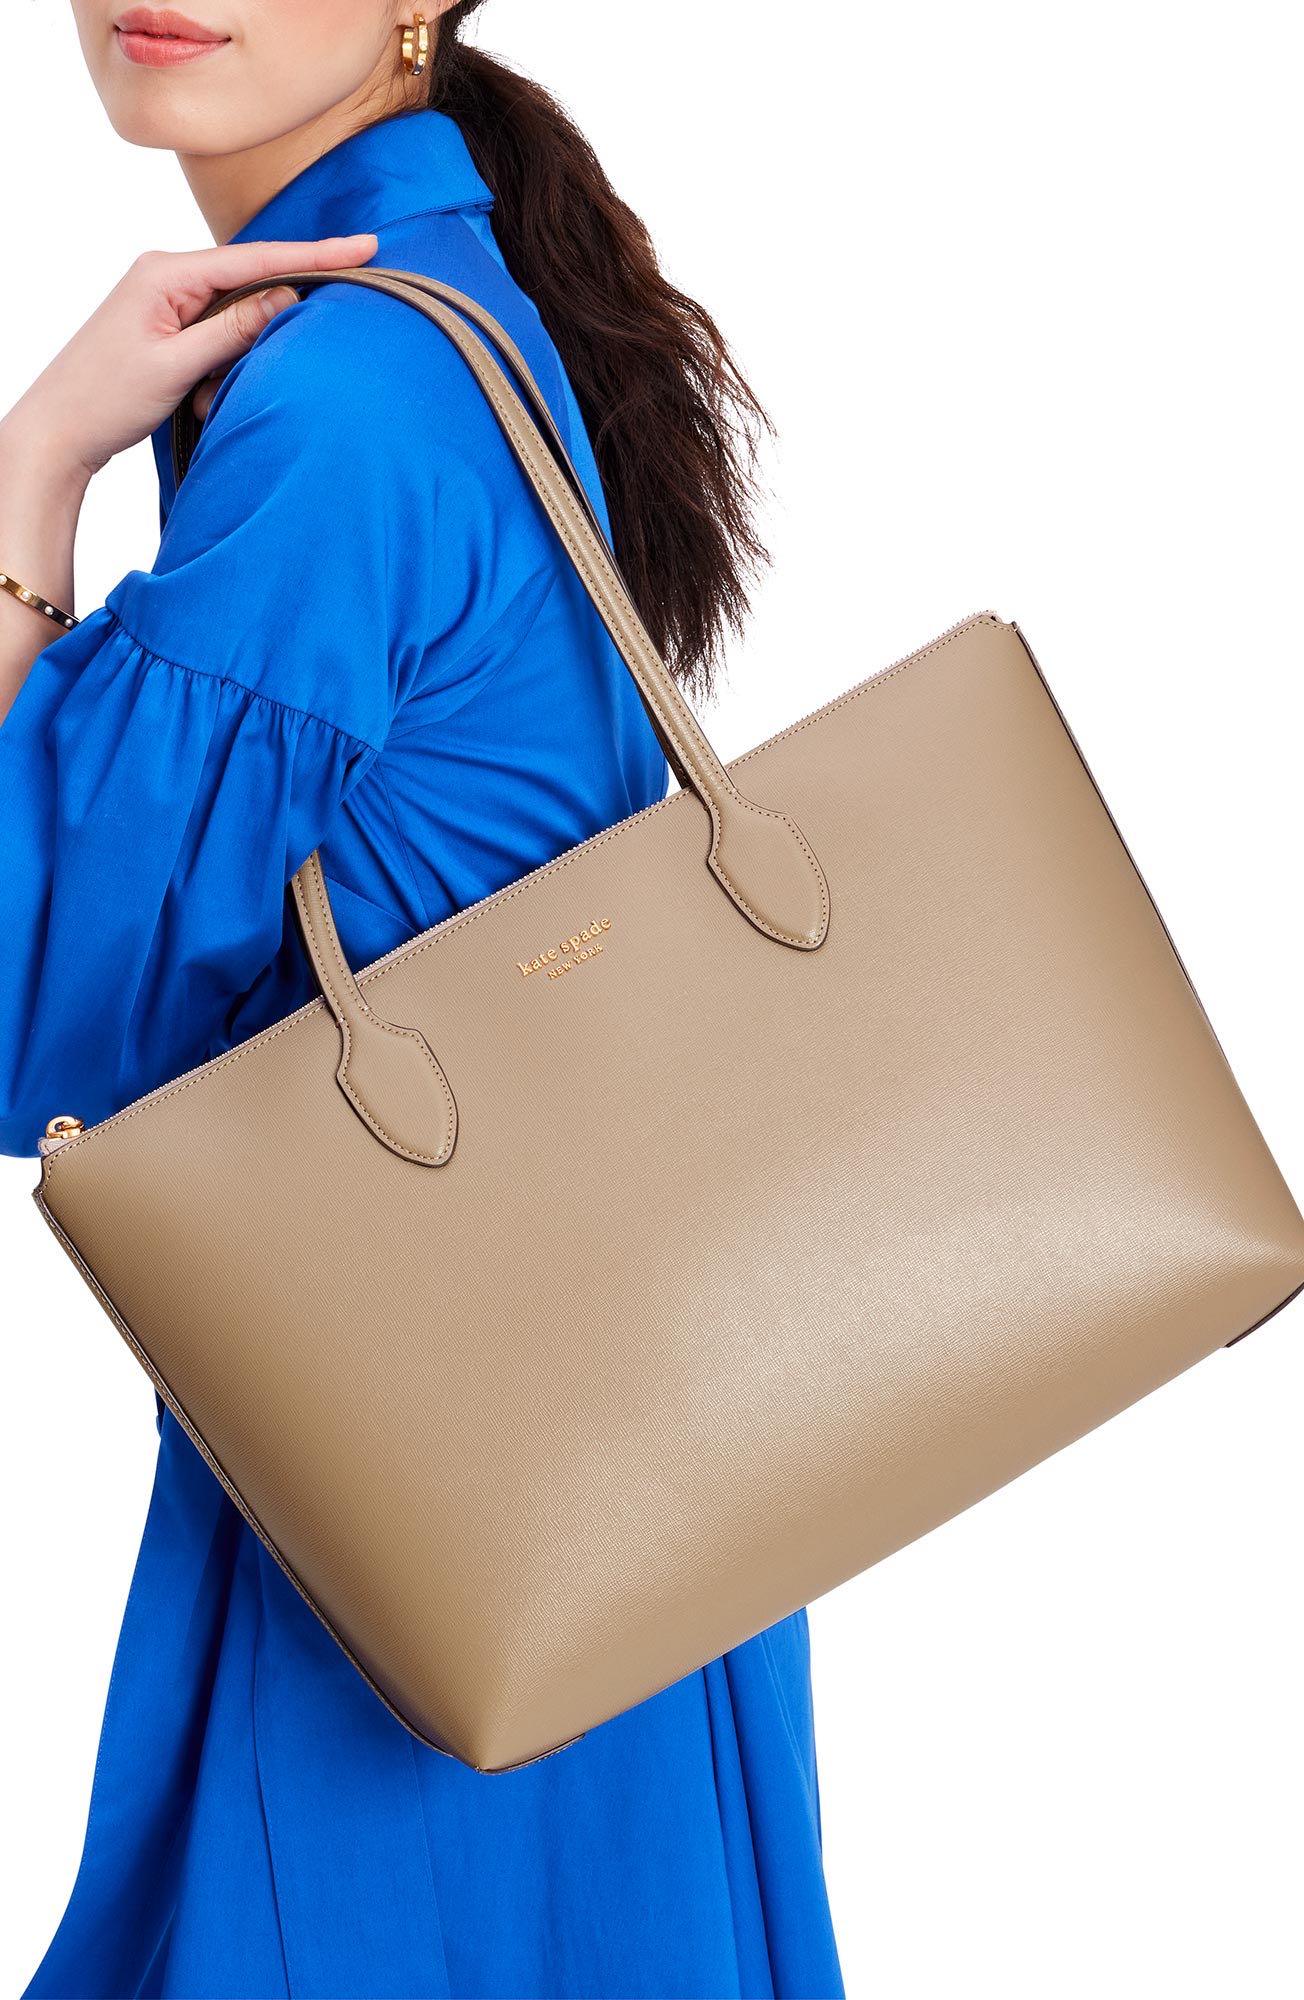 kc923_Bleecker Large Zip-top Tote_Timeless Taupe